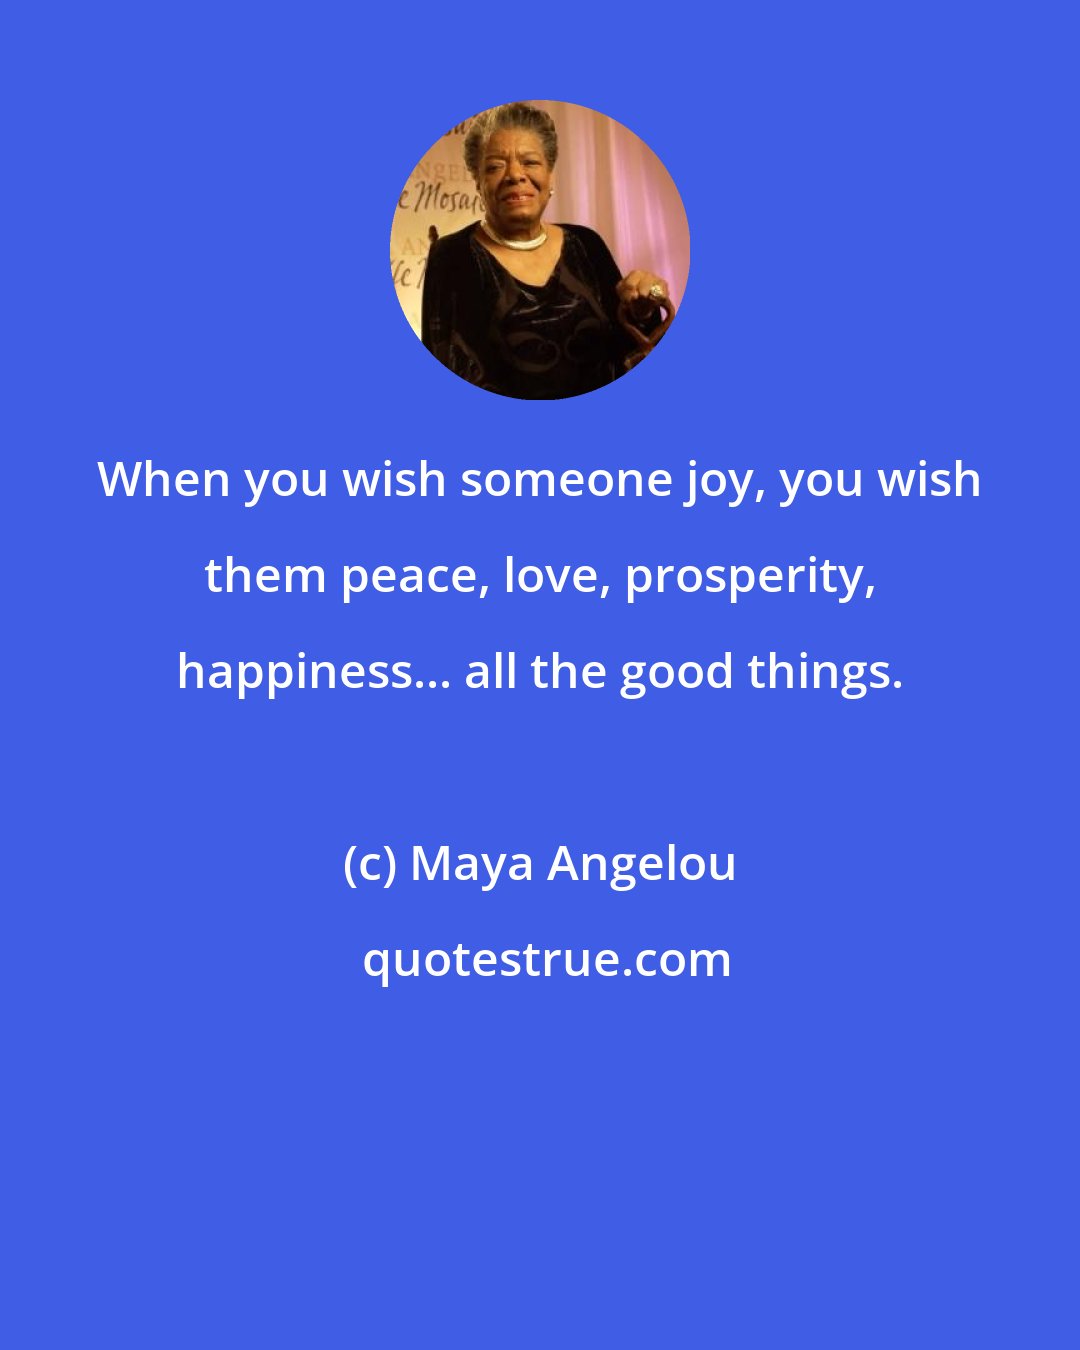 Maya Angelou: When you wish someone joy, you wish them peace, love, prosperity, happiness... all the good things.